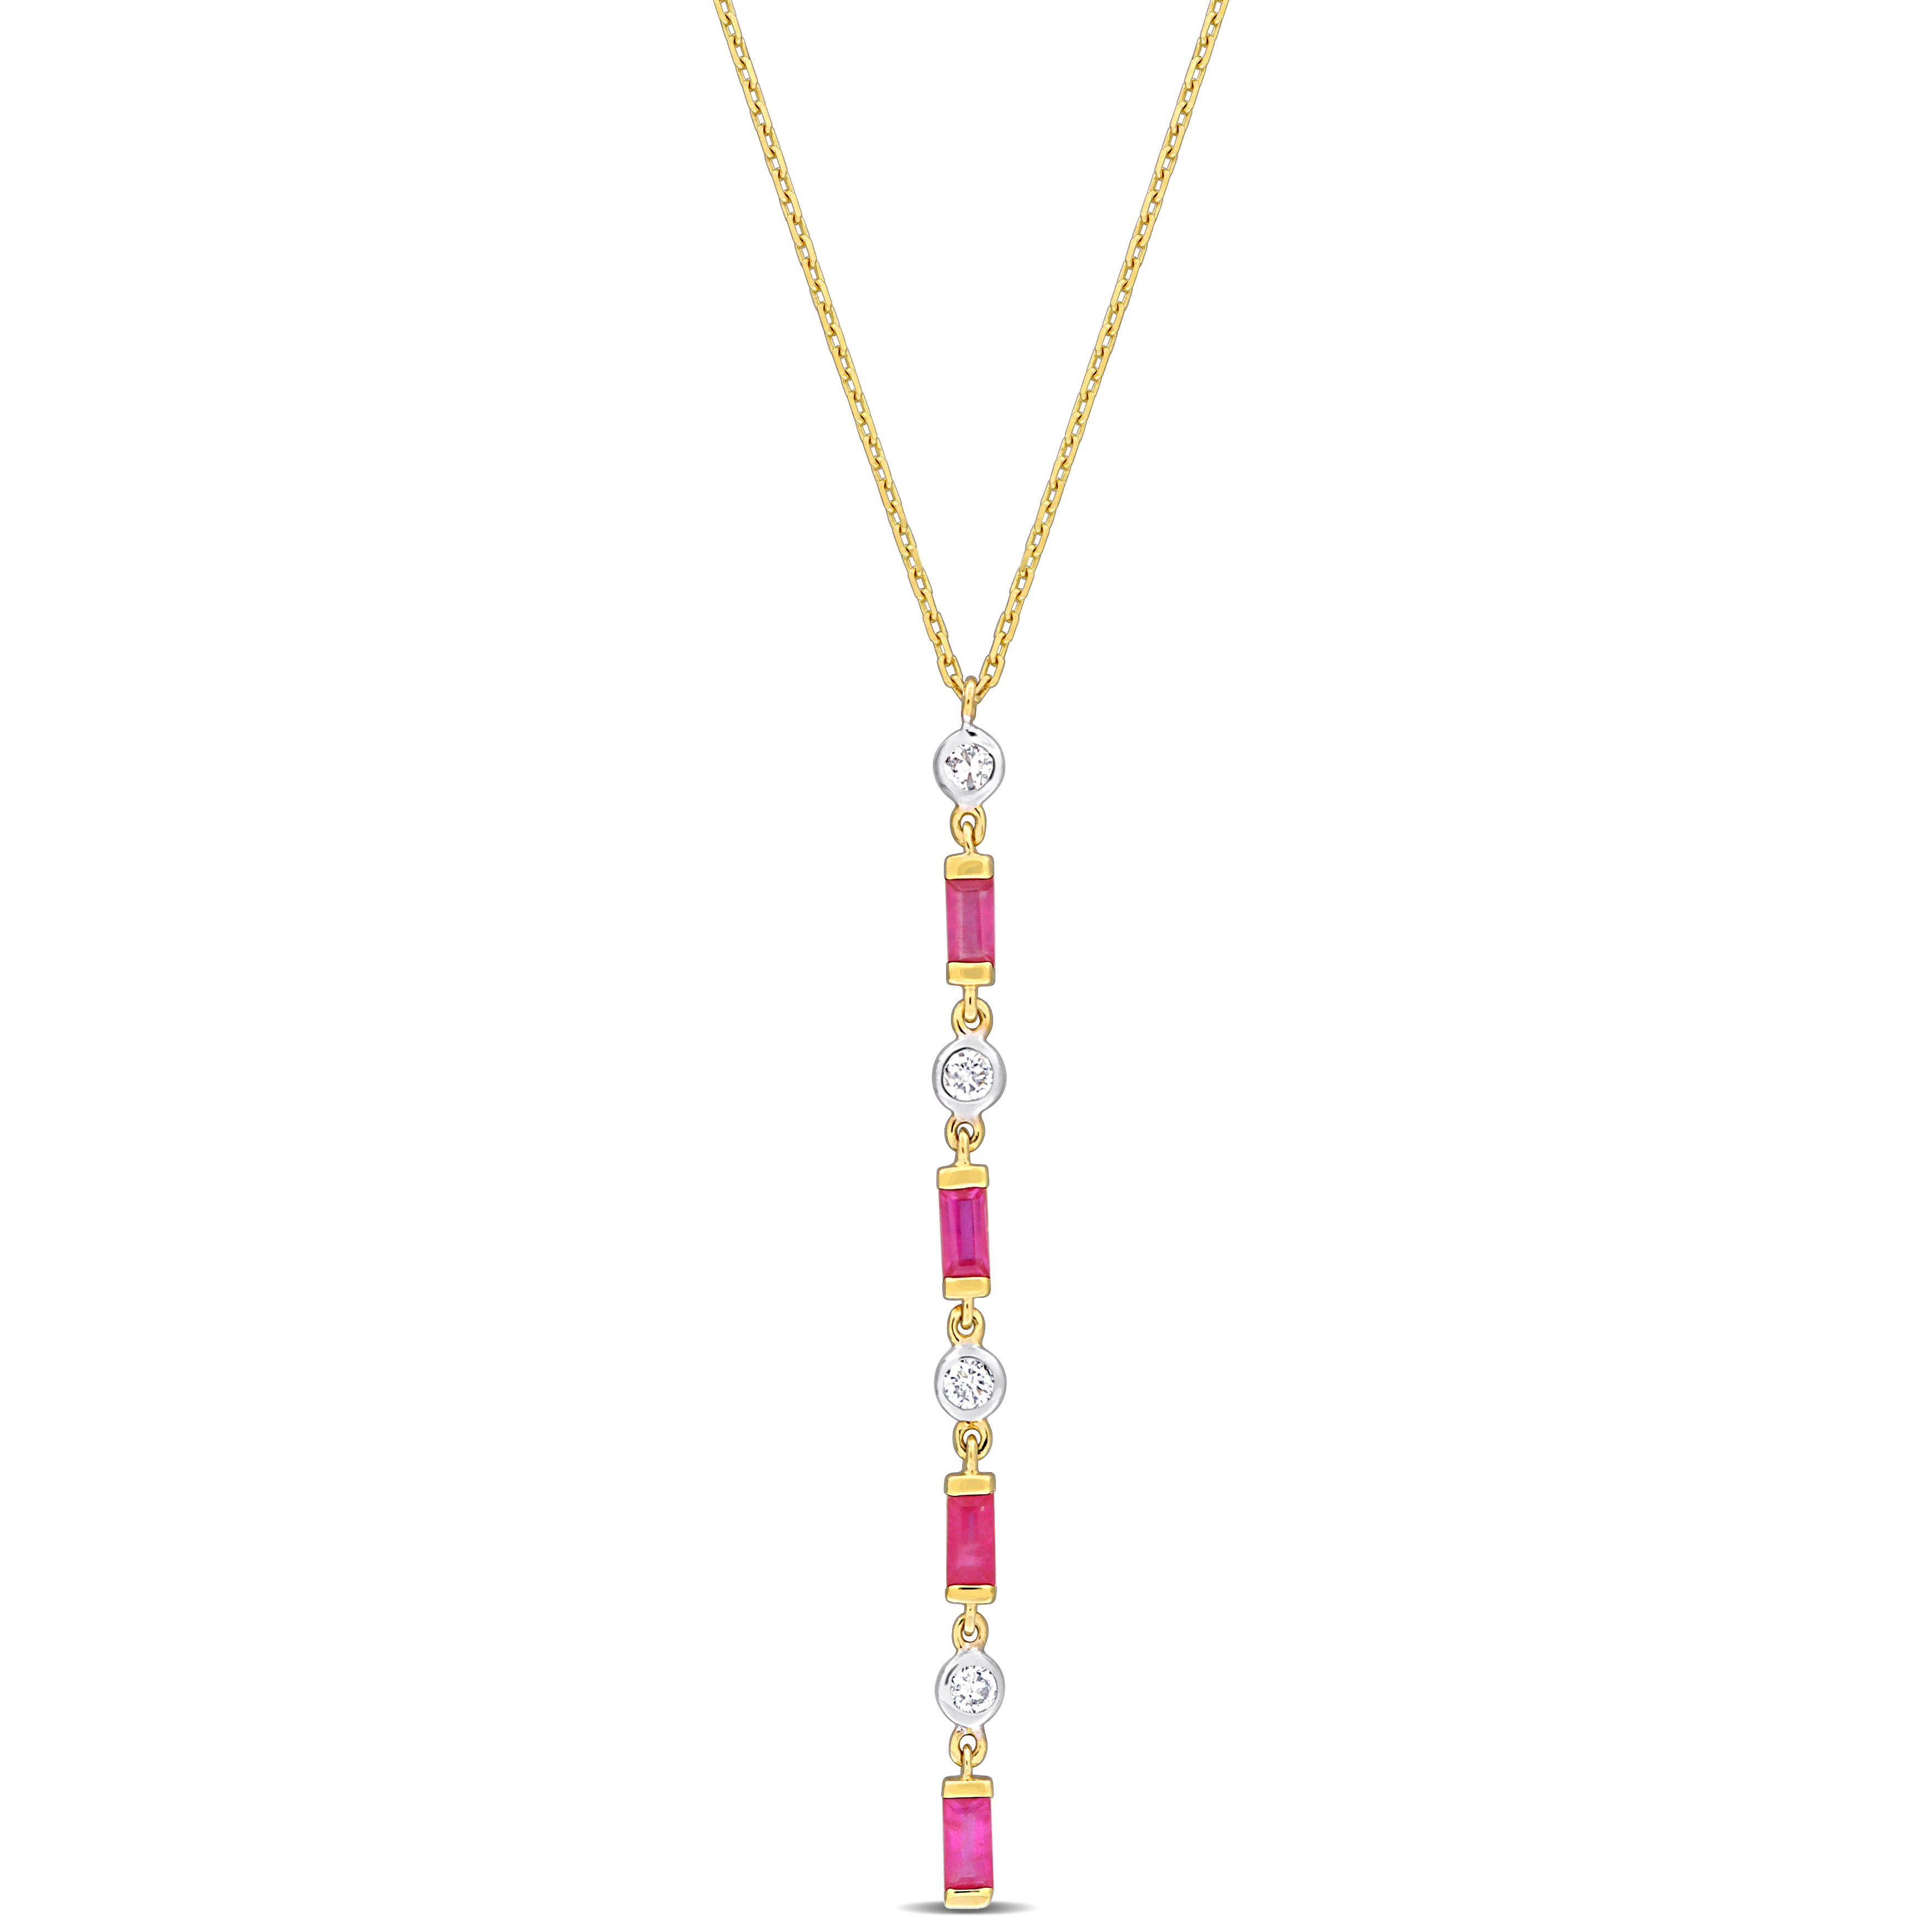 1/5 CT TDW Diamond & 1/6 TGW Baguette Cut Ruby Lariat Necklace in 10k Yellow Gold- 16.5 in.